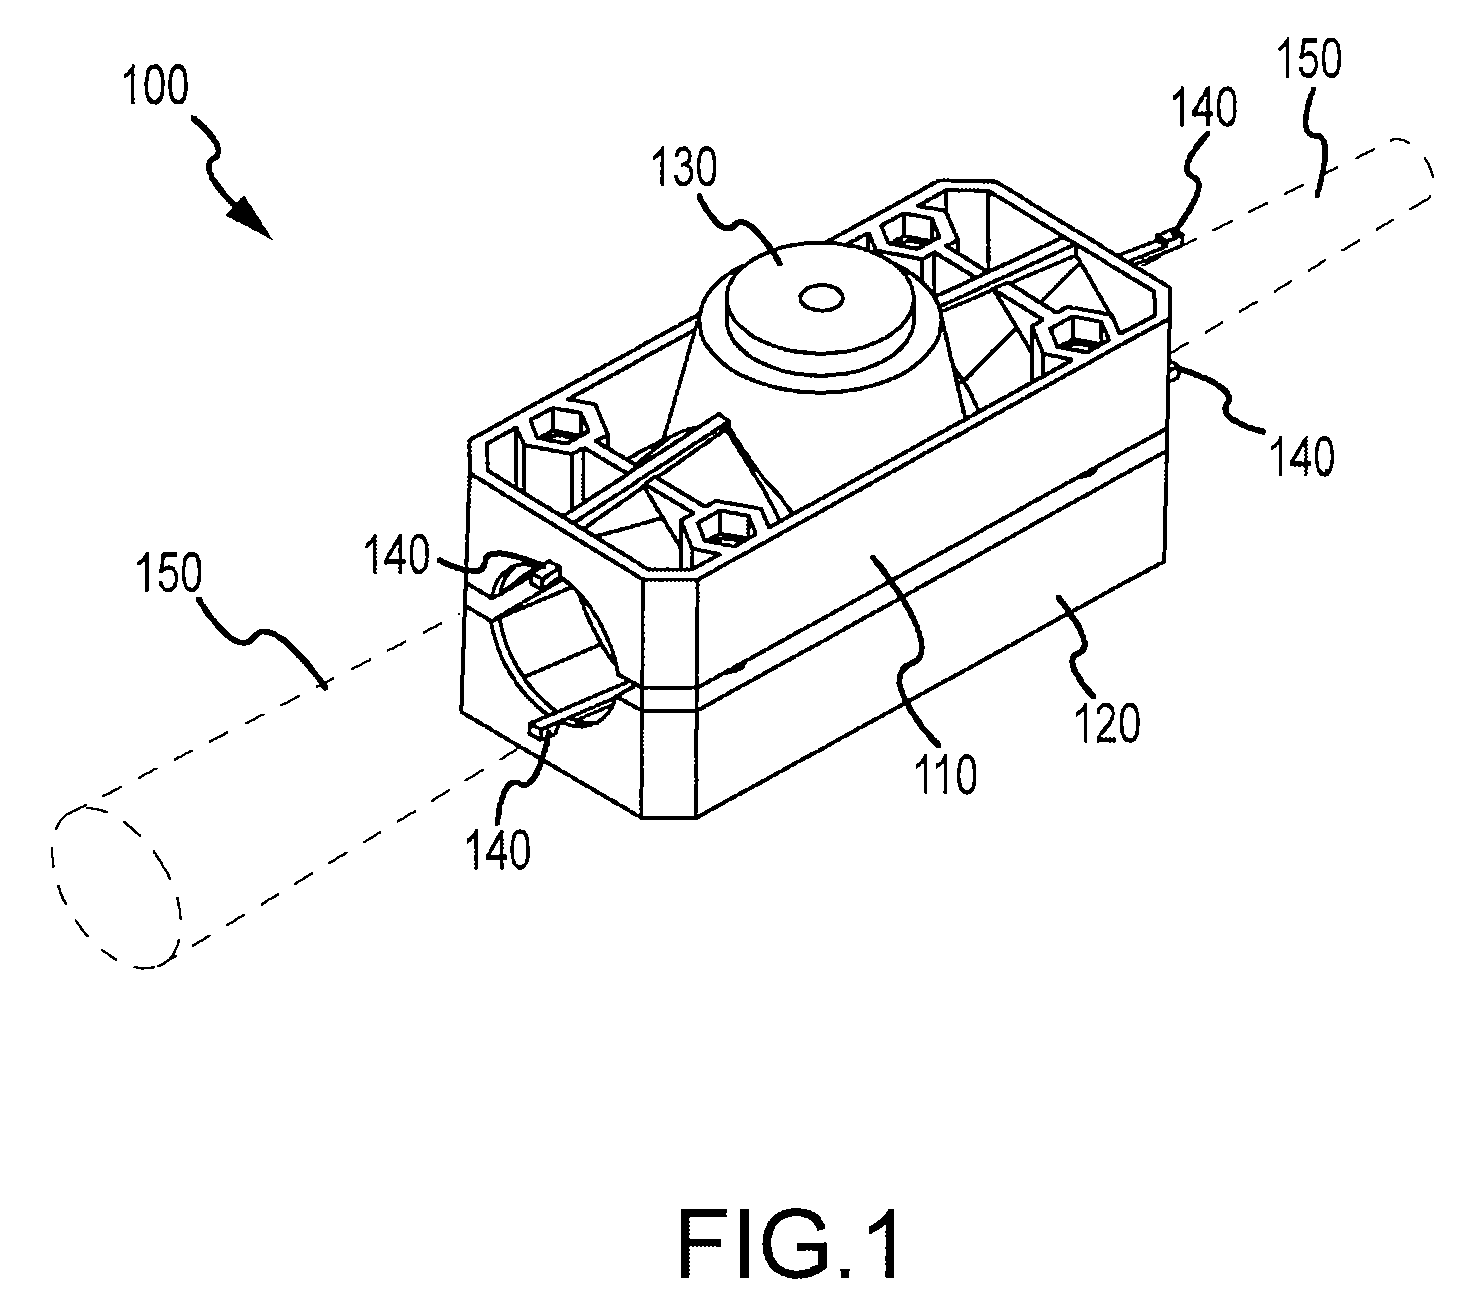 Adjustable handle clamp systems and methods